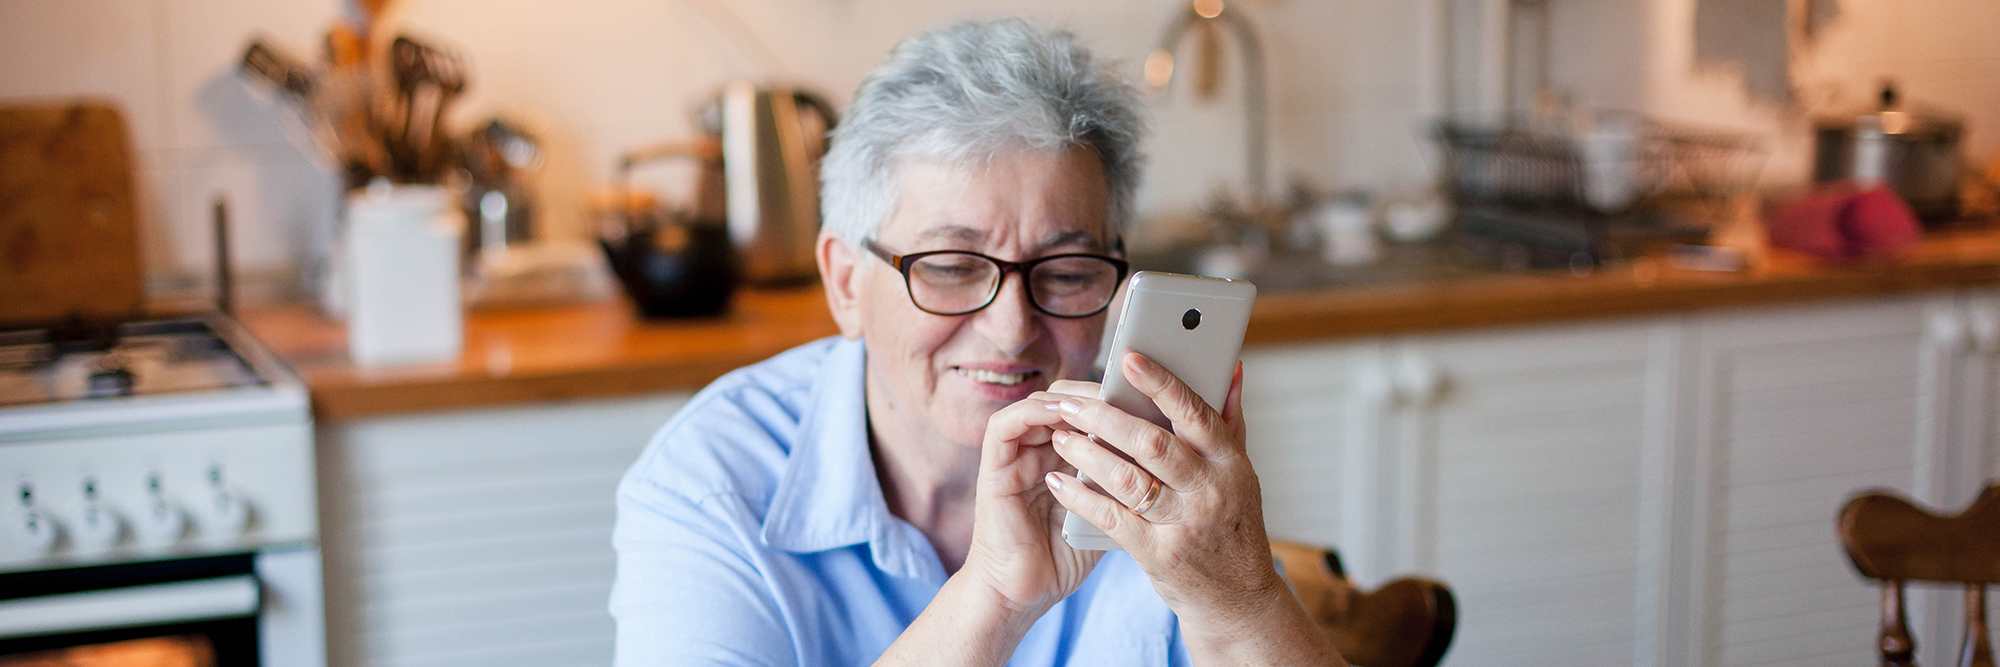 older lady sitting at her kitchen table smiling at her smartphone  | smartphone for a grandparent